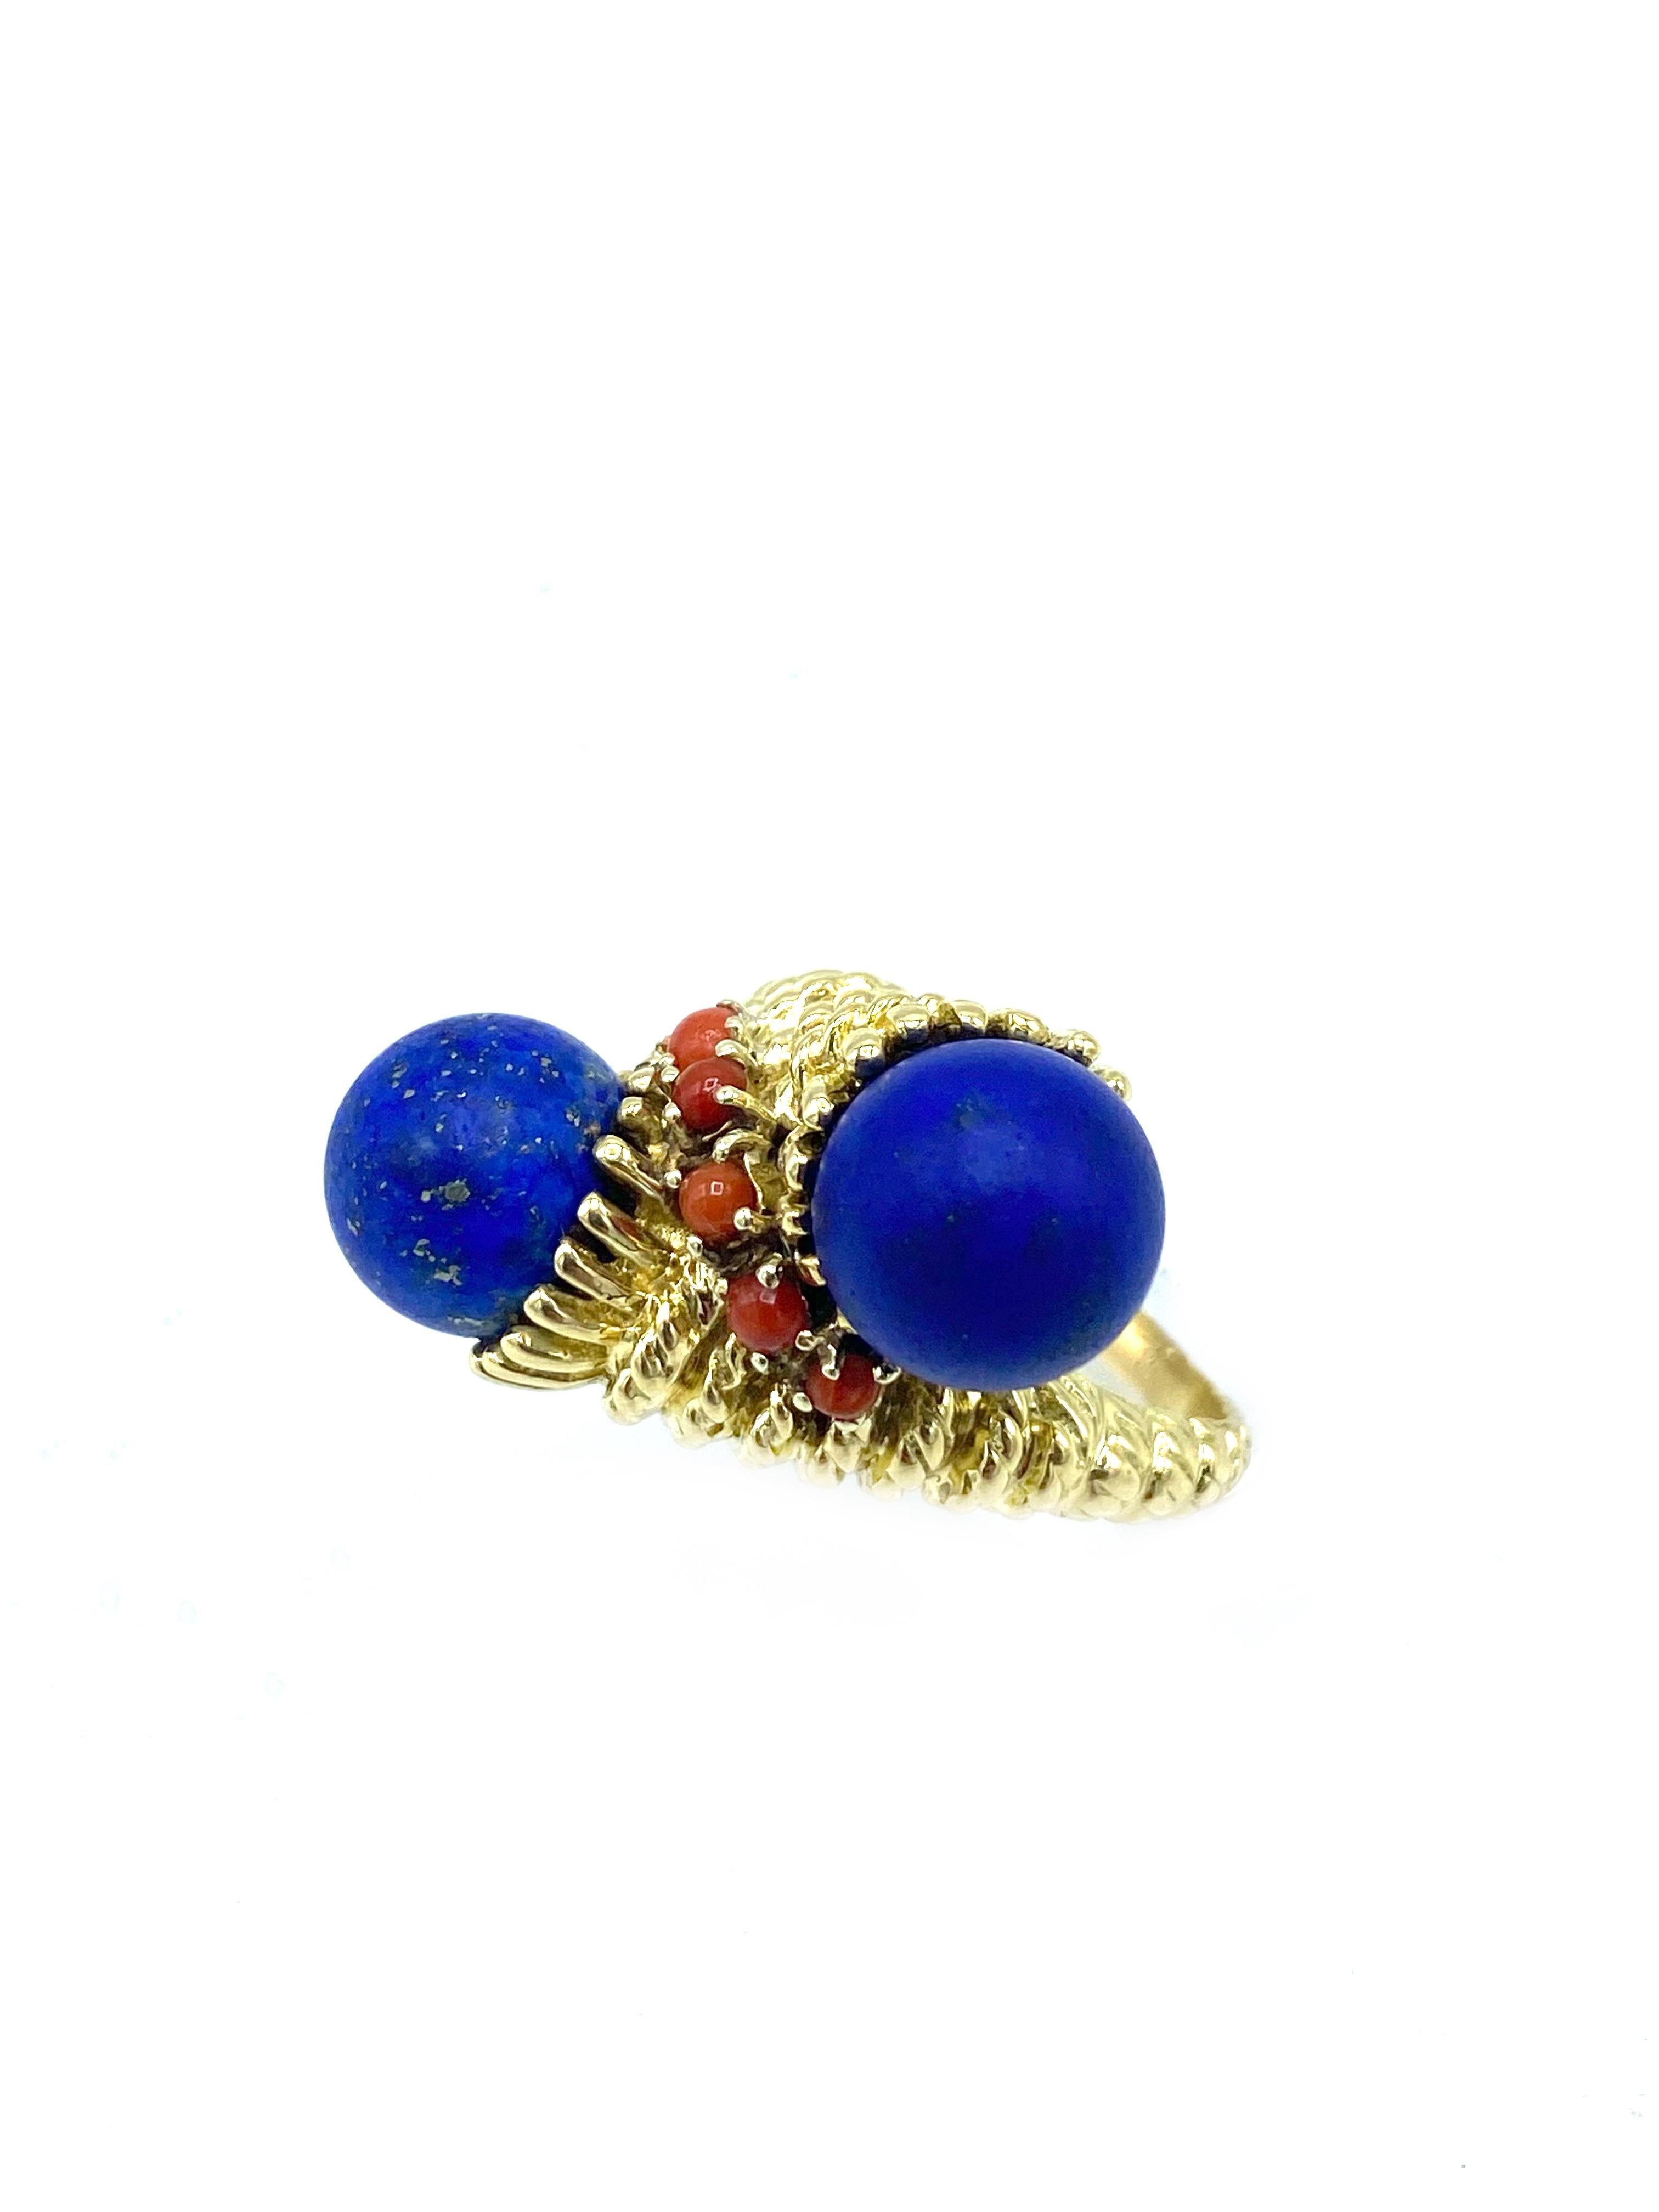  Product details:

The ring is made out of 18 karat yellow gold, featuring twisted robe finish; lapis and coral.

Measurements: 1